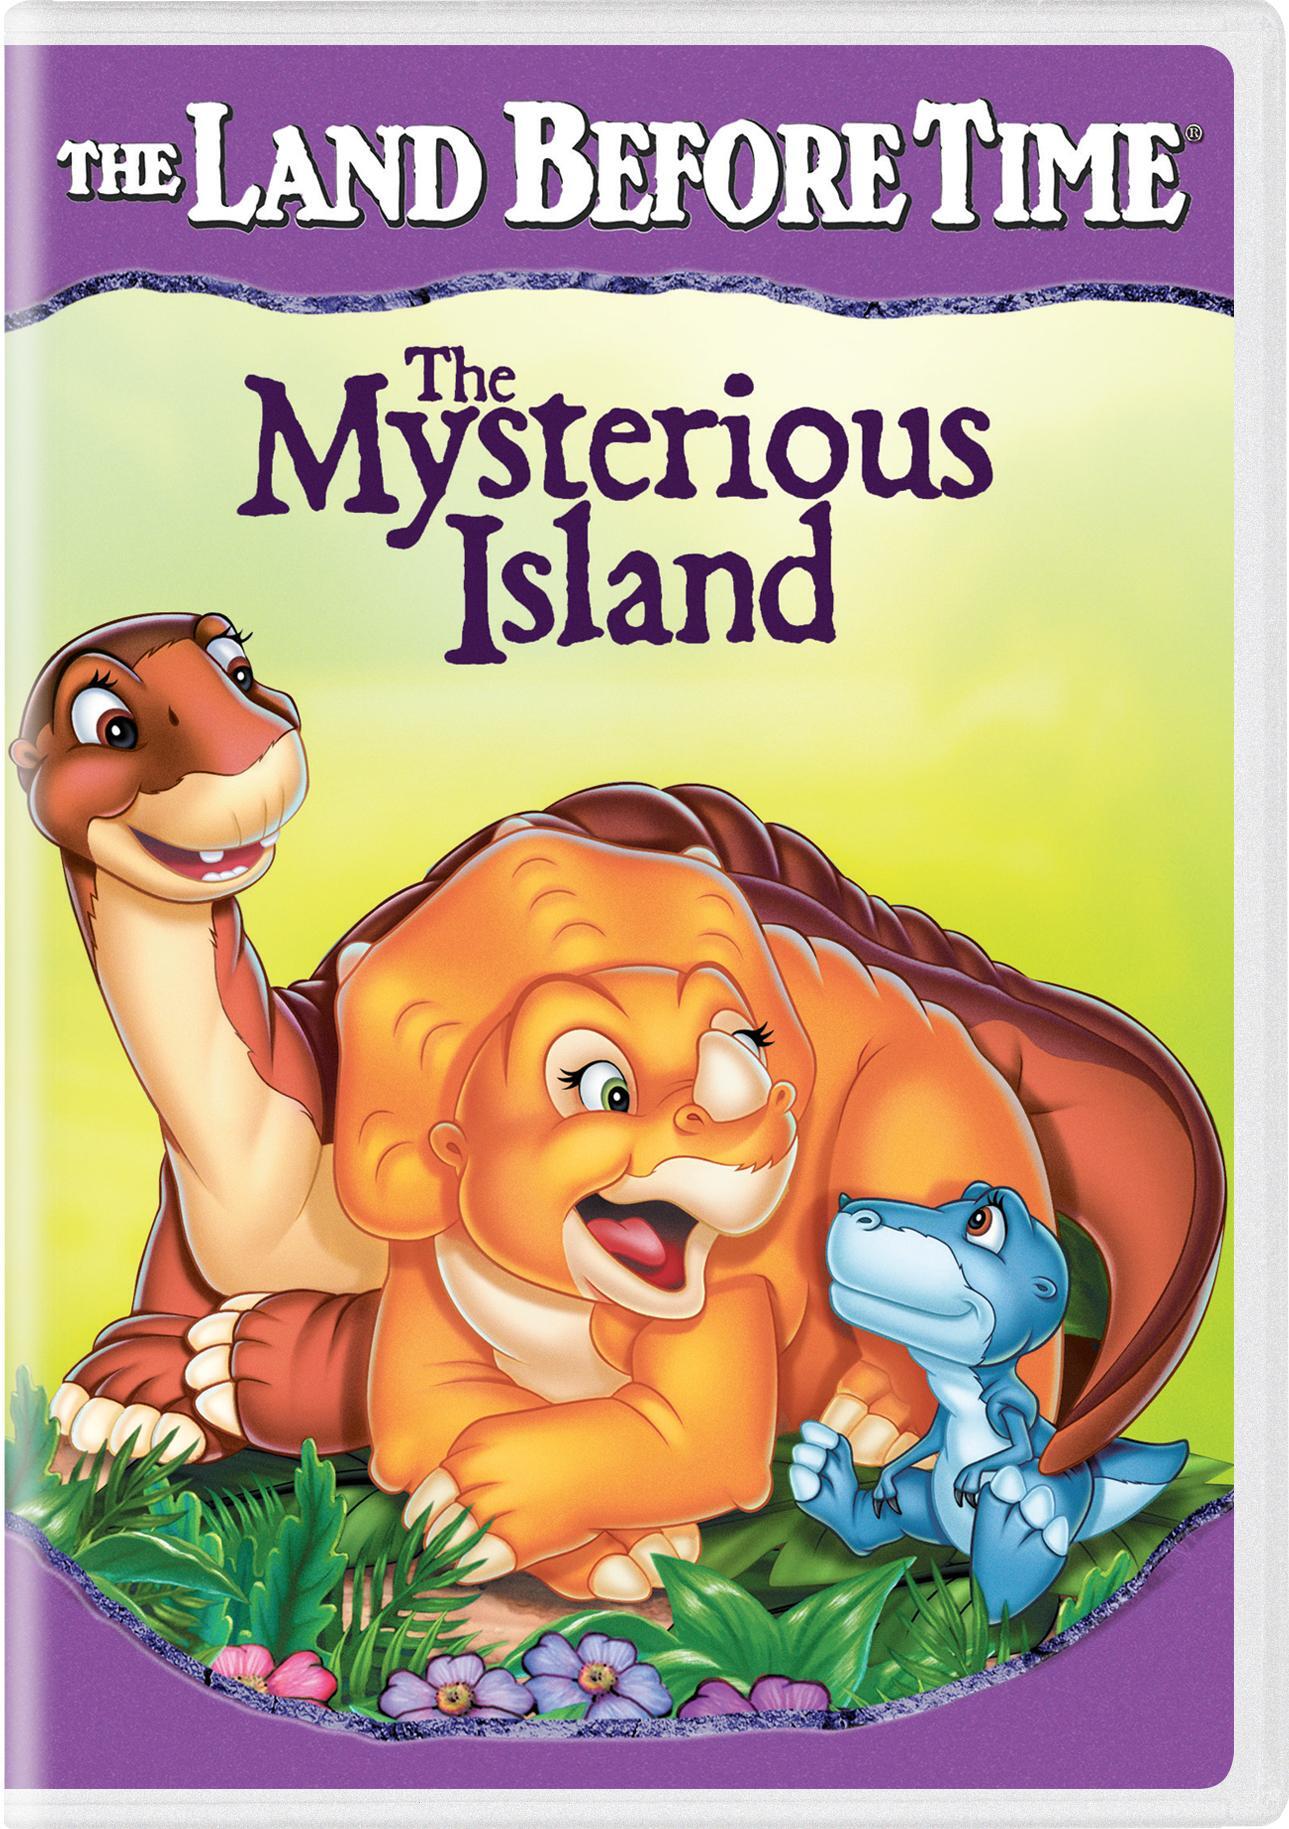 The Land Before Time 5 - The Mysterious Island - DVD [ 1997 ]  - Children Movies On DVD - Movies On GRUV